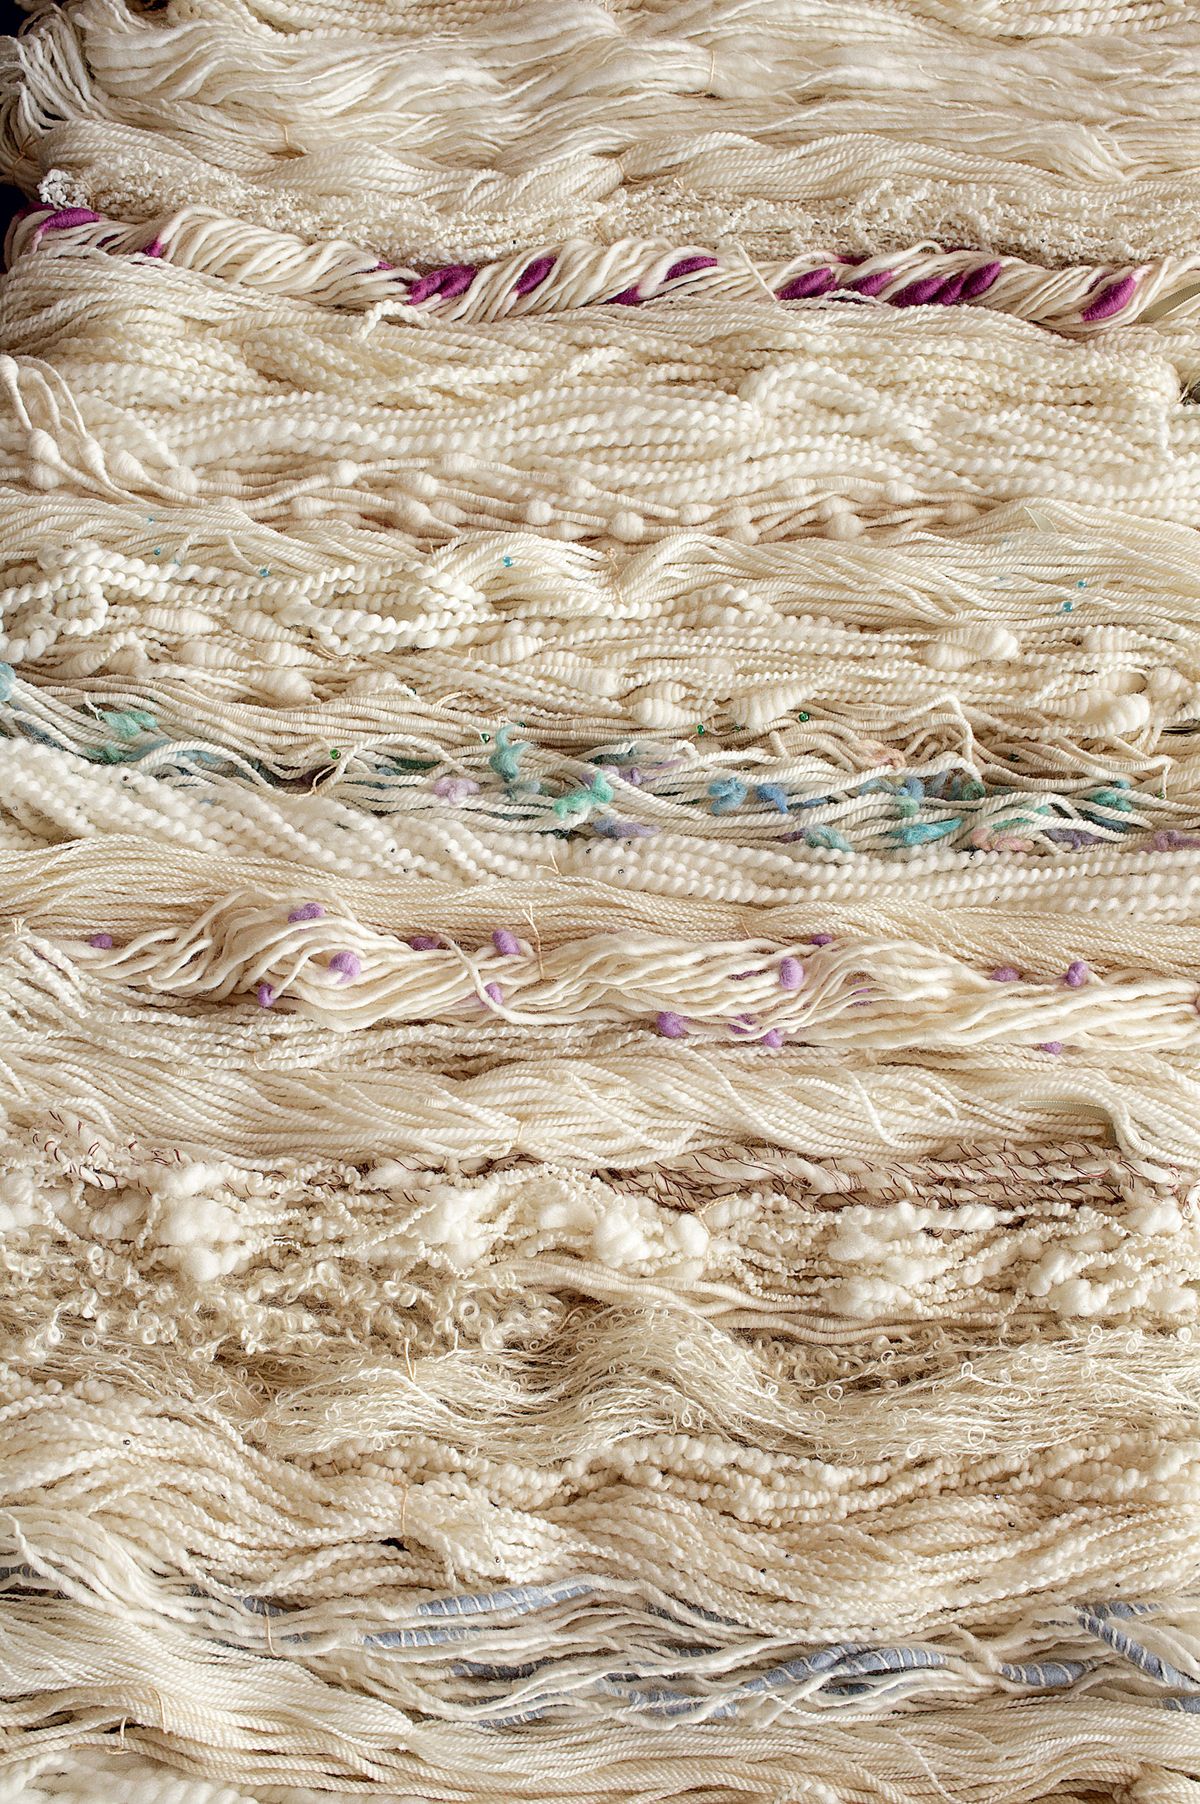 This photo provided by Storey Publishing shows handspun yarn from “The Spinner’s Book of Yarn Designs: Techniques for Creating 80 Yarns,” by author Sarah Anderson. (Associated Press)